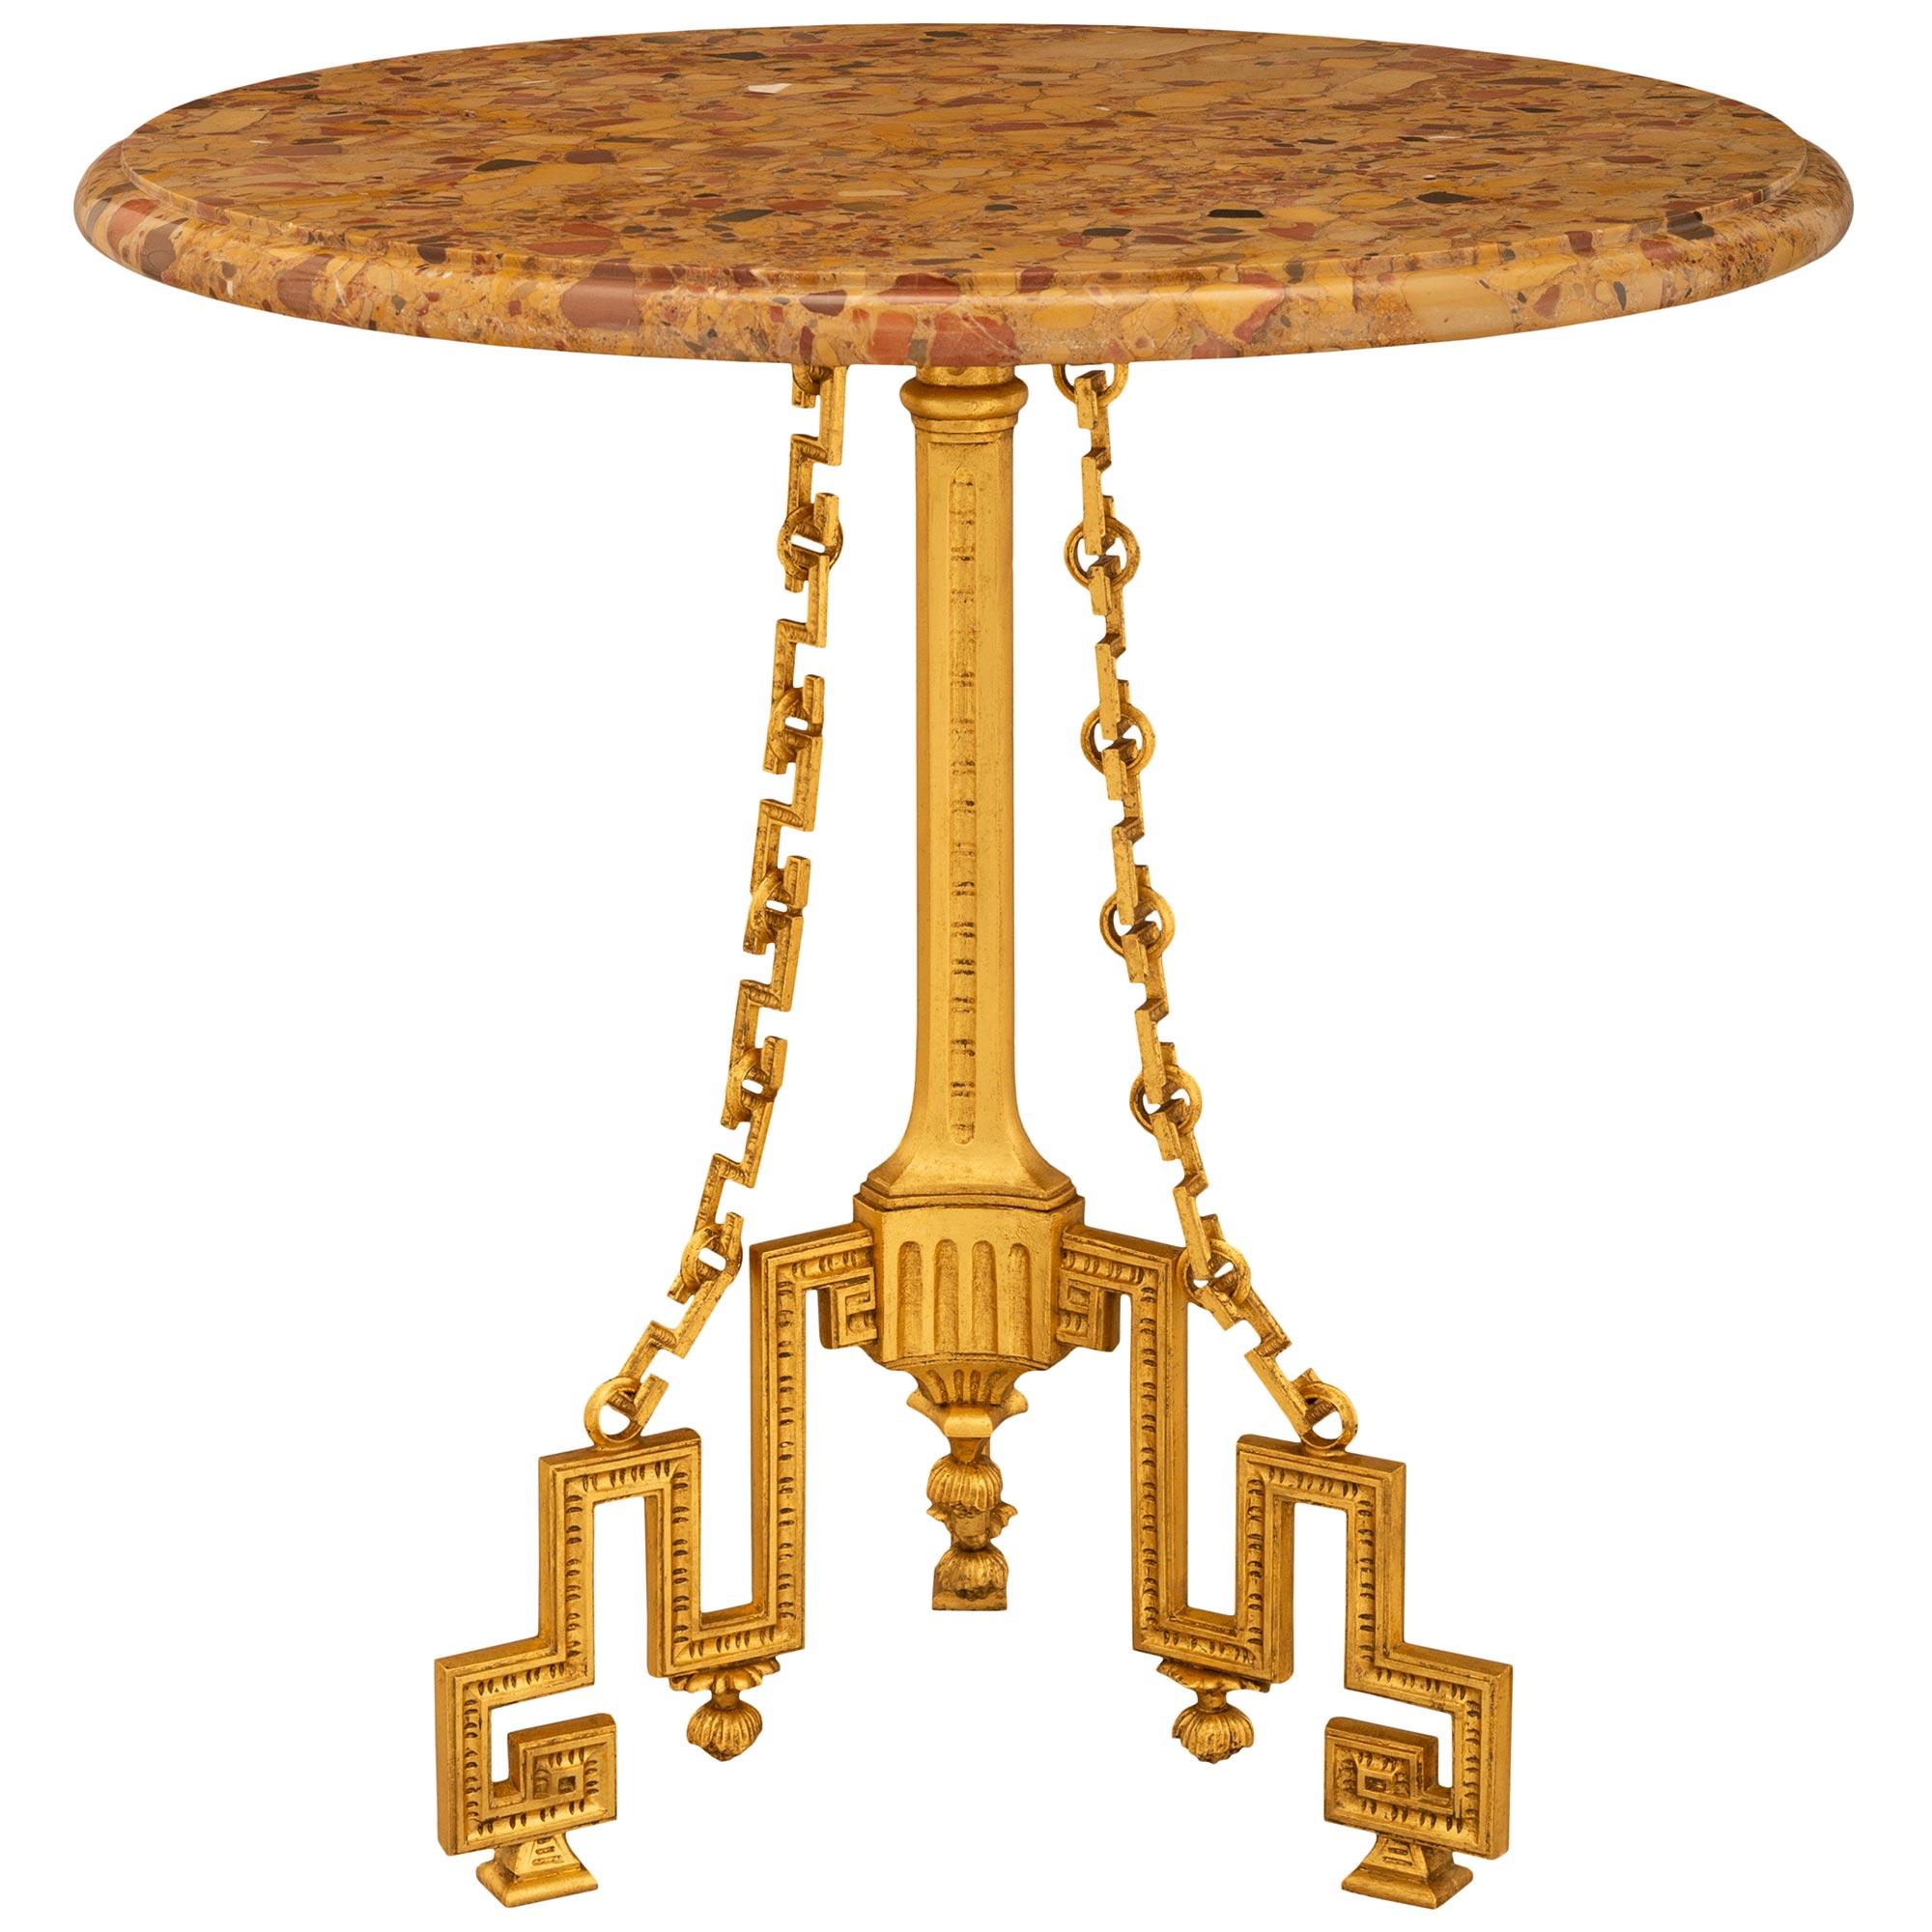 A stunning and most unique French 19th century Louis XVI st. Ormolu and Breche d'Alep marble Guéridon side table. This stunning table is raised by three Greek Key designed Ormolu legs with square supports. Each leg displays an acorn central finial